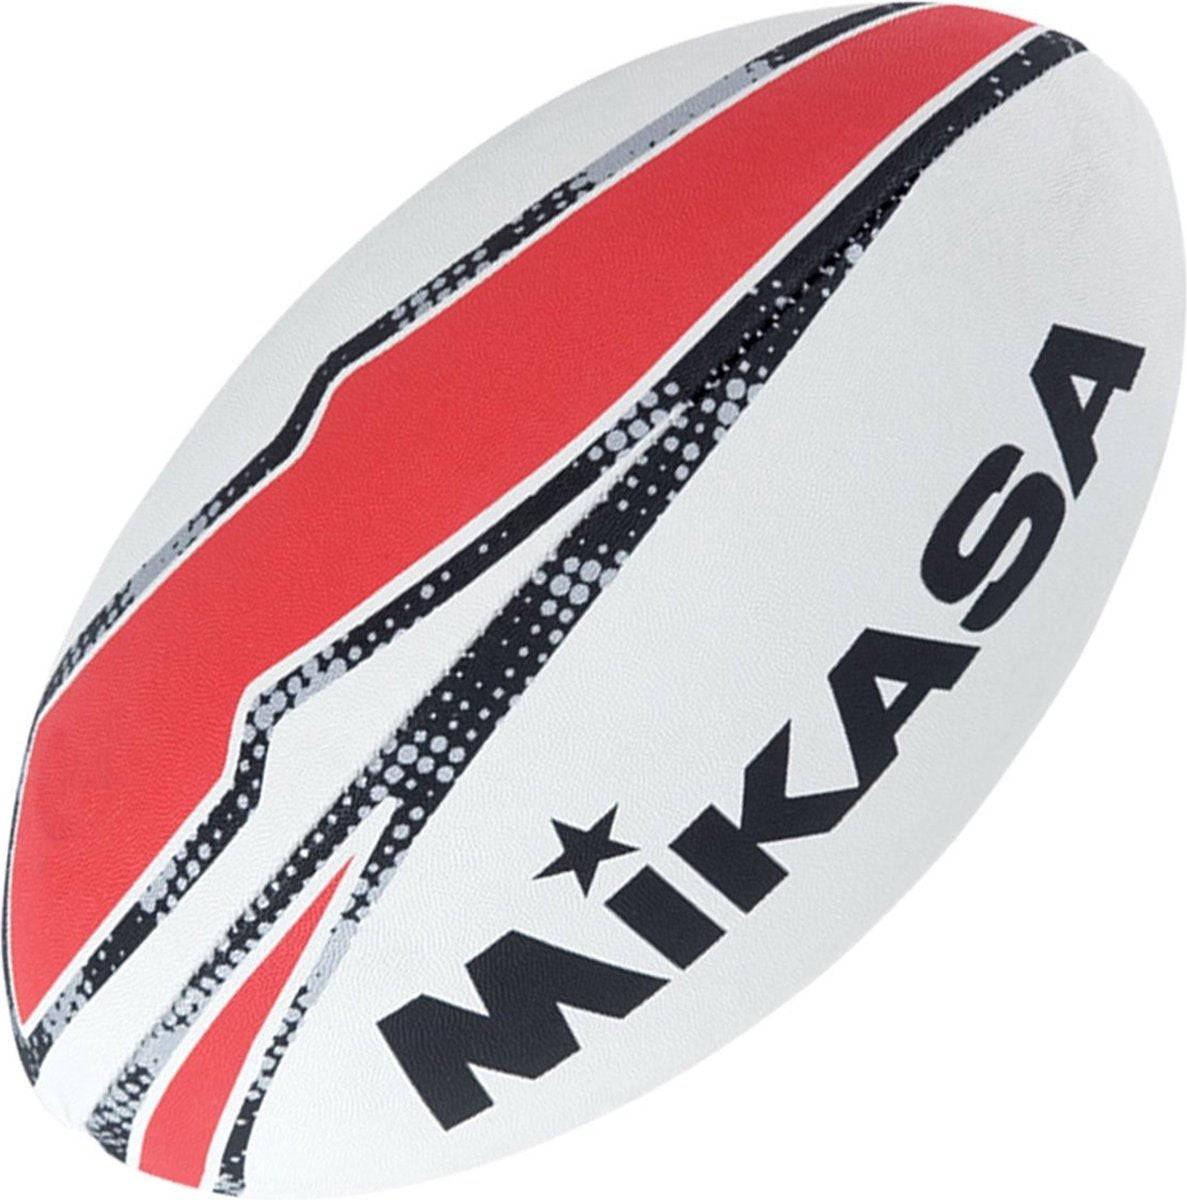 Rugby ball - RNB7 - IRB approved